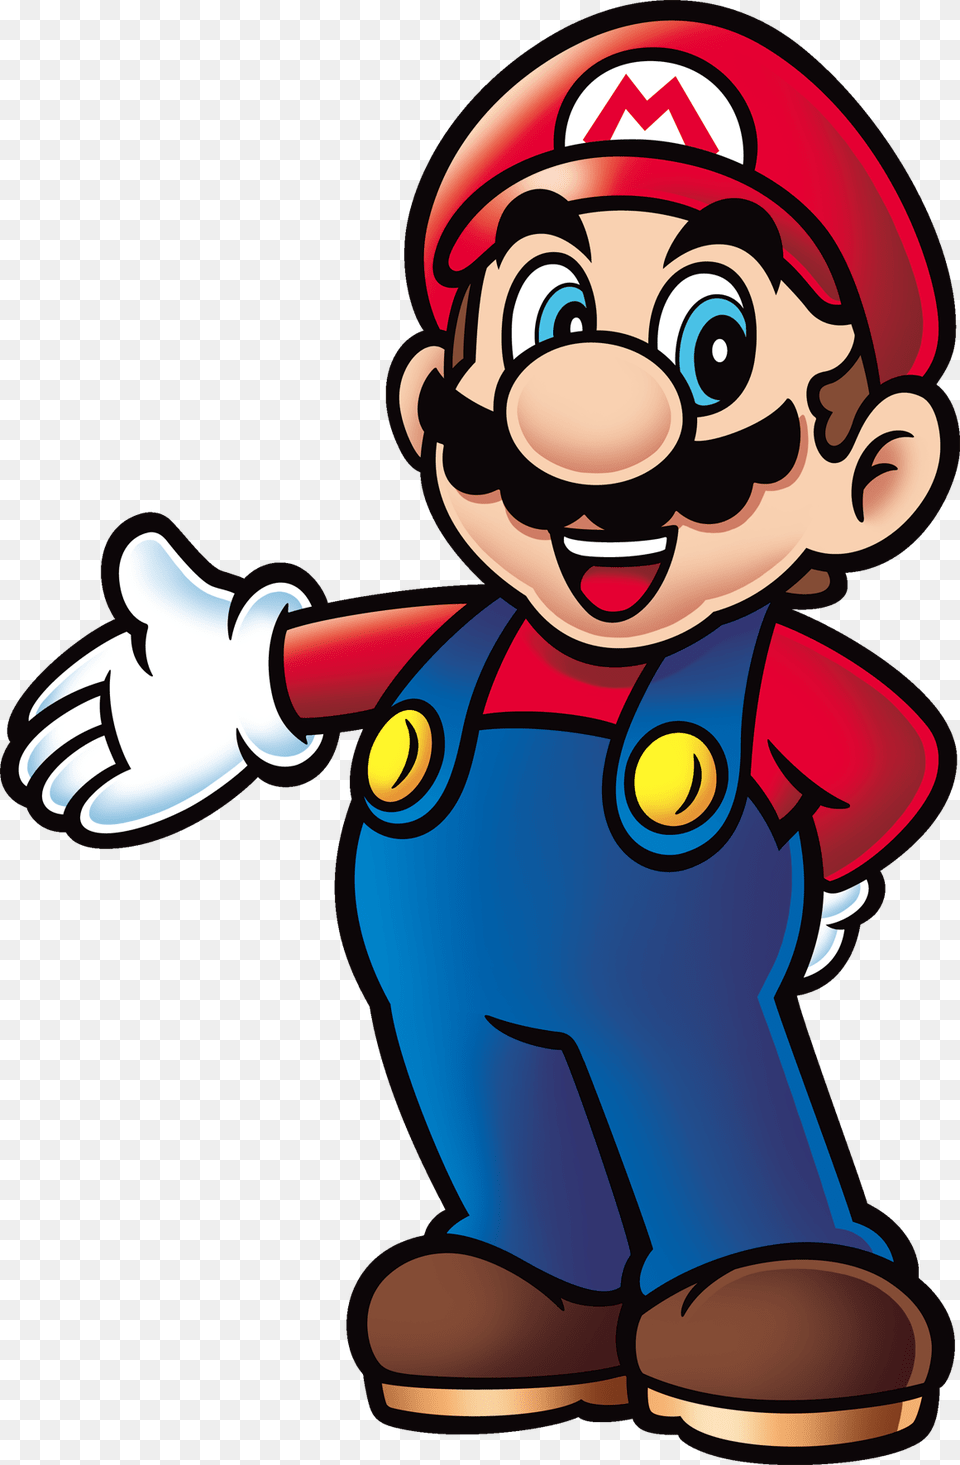 Come Here If You Have The Subscription, Game, Super Mario, Baby, Face Png Image